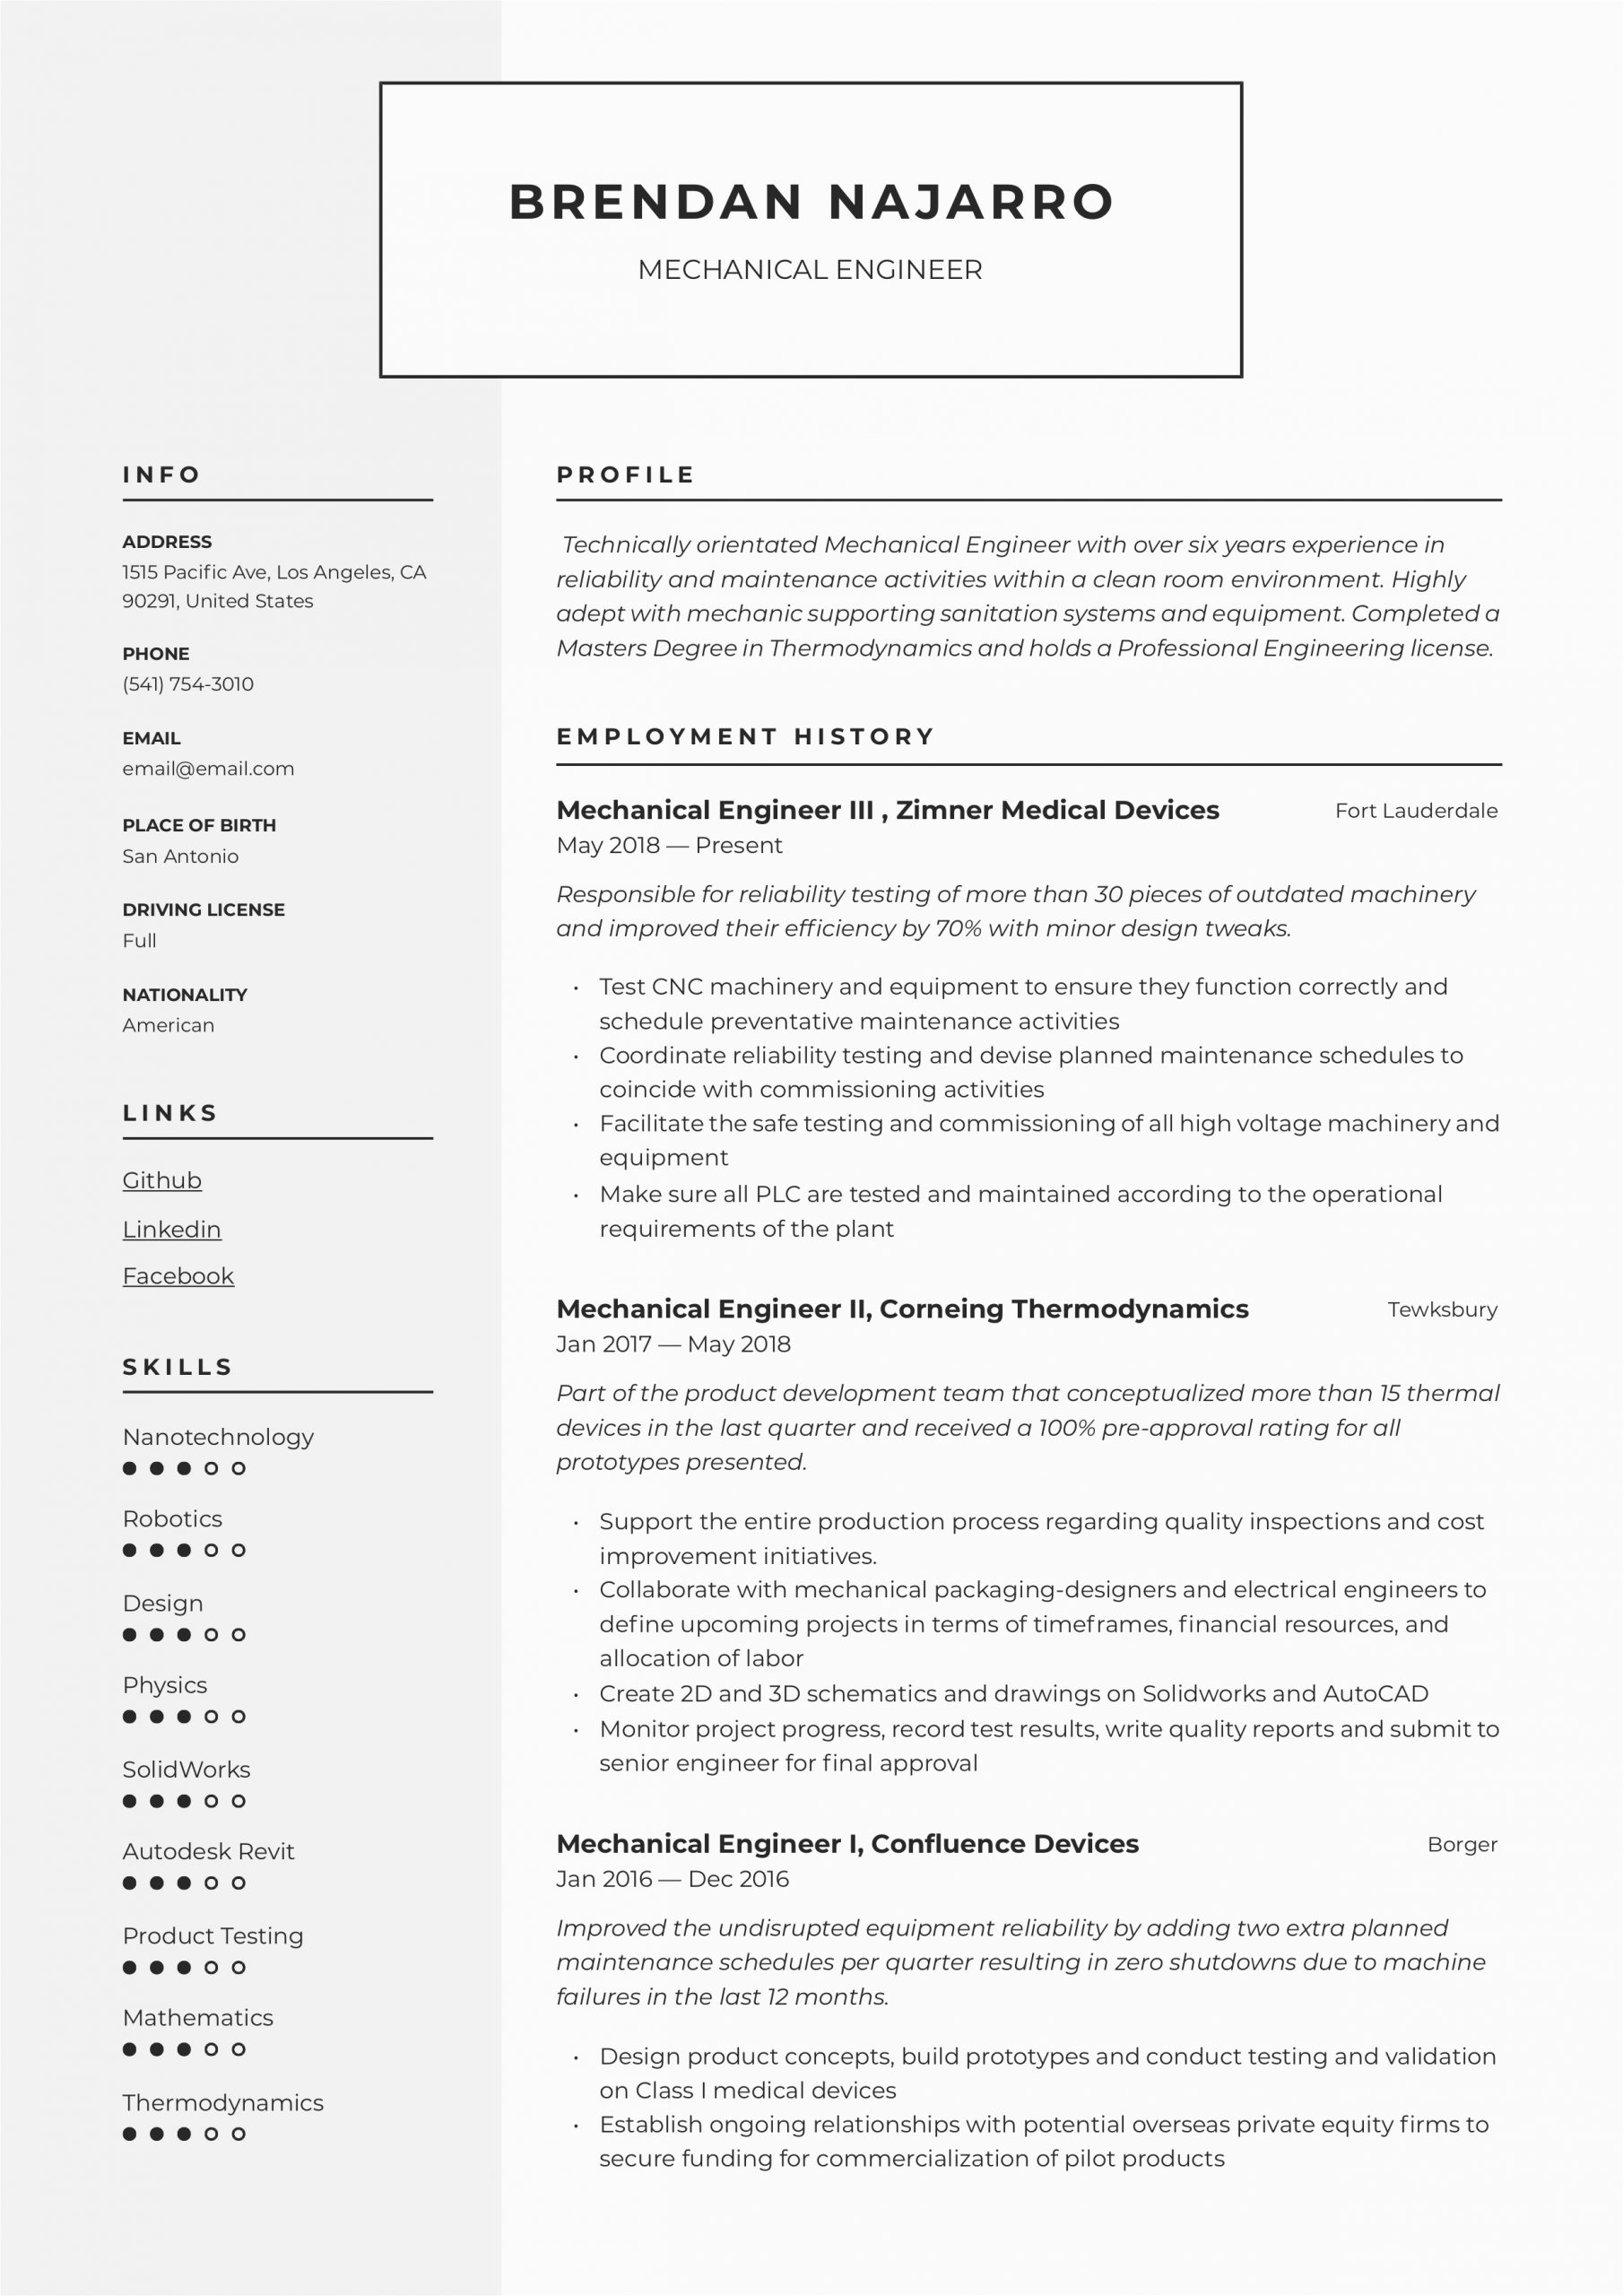 Experience Resume Sample for Mechanical Engineer Mechanical Engineer Resume & Writing Guide